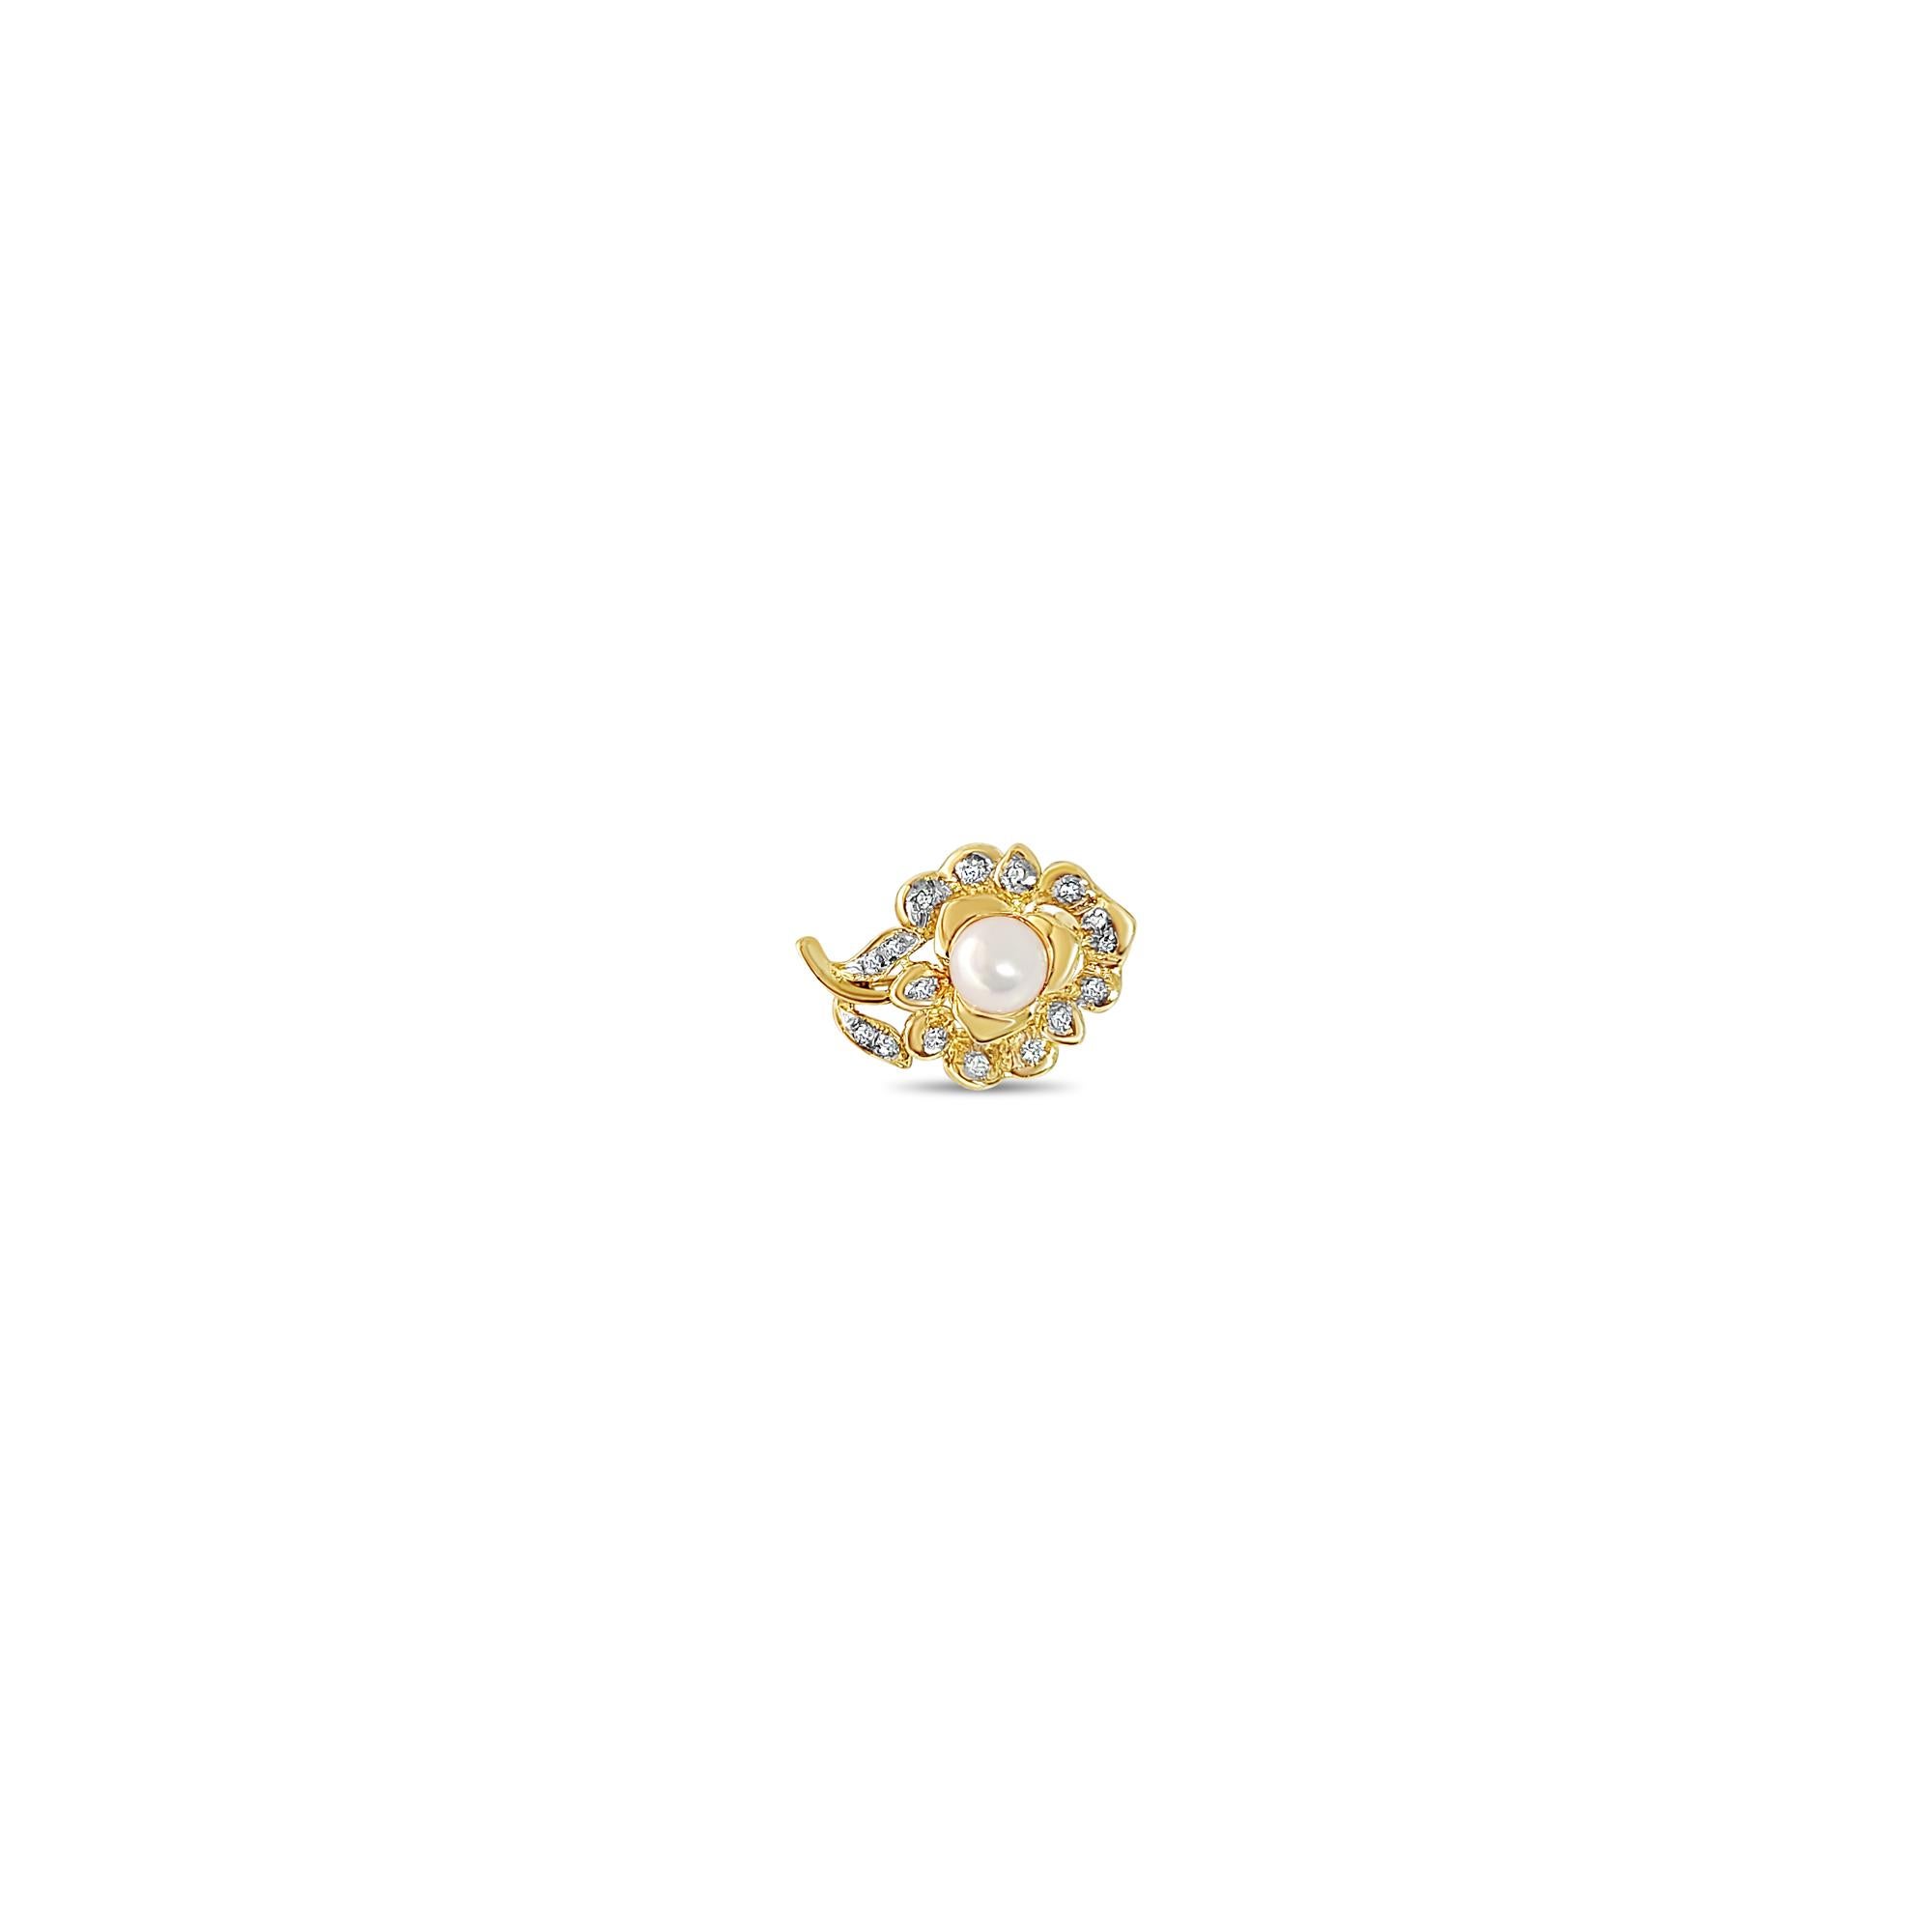 Pearl & Diamond Pave Brooch 14k Yellow Gold In New Condition For Sale In Sugar Land, TX